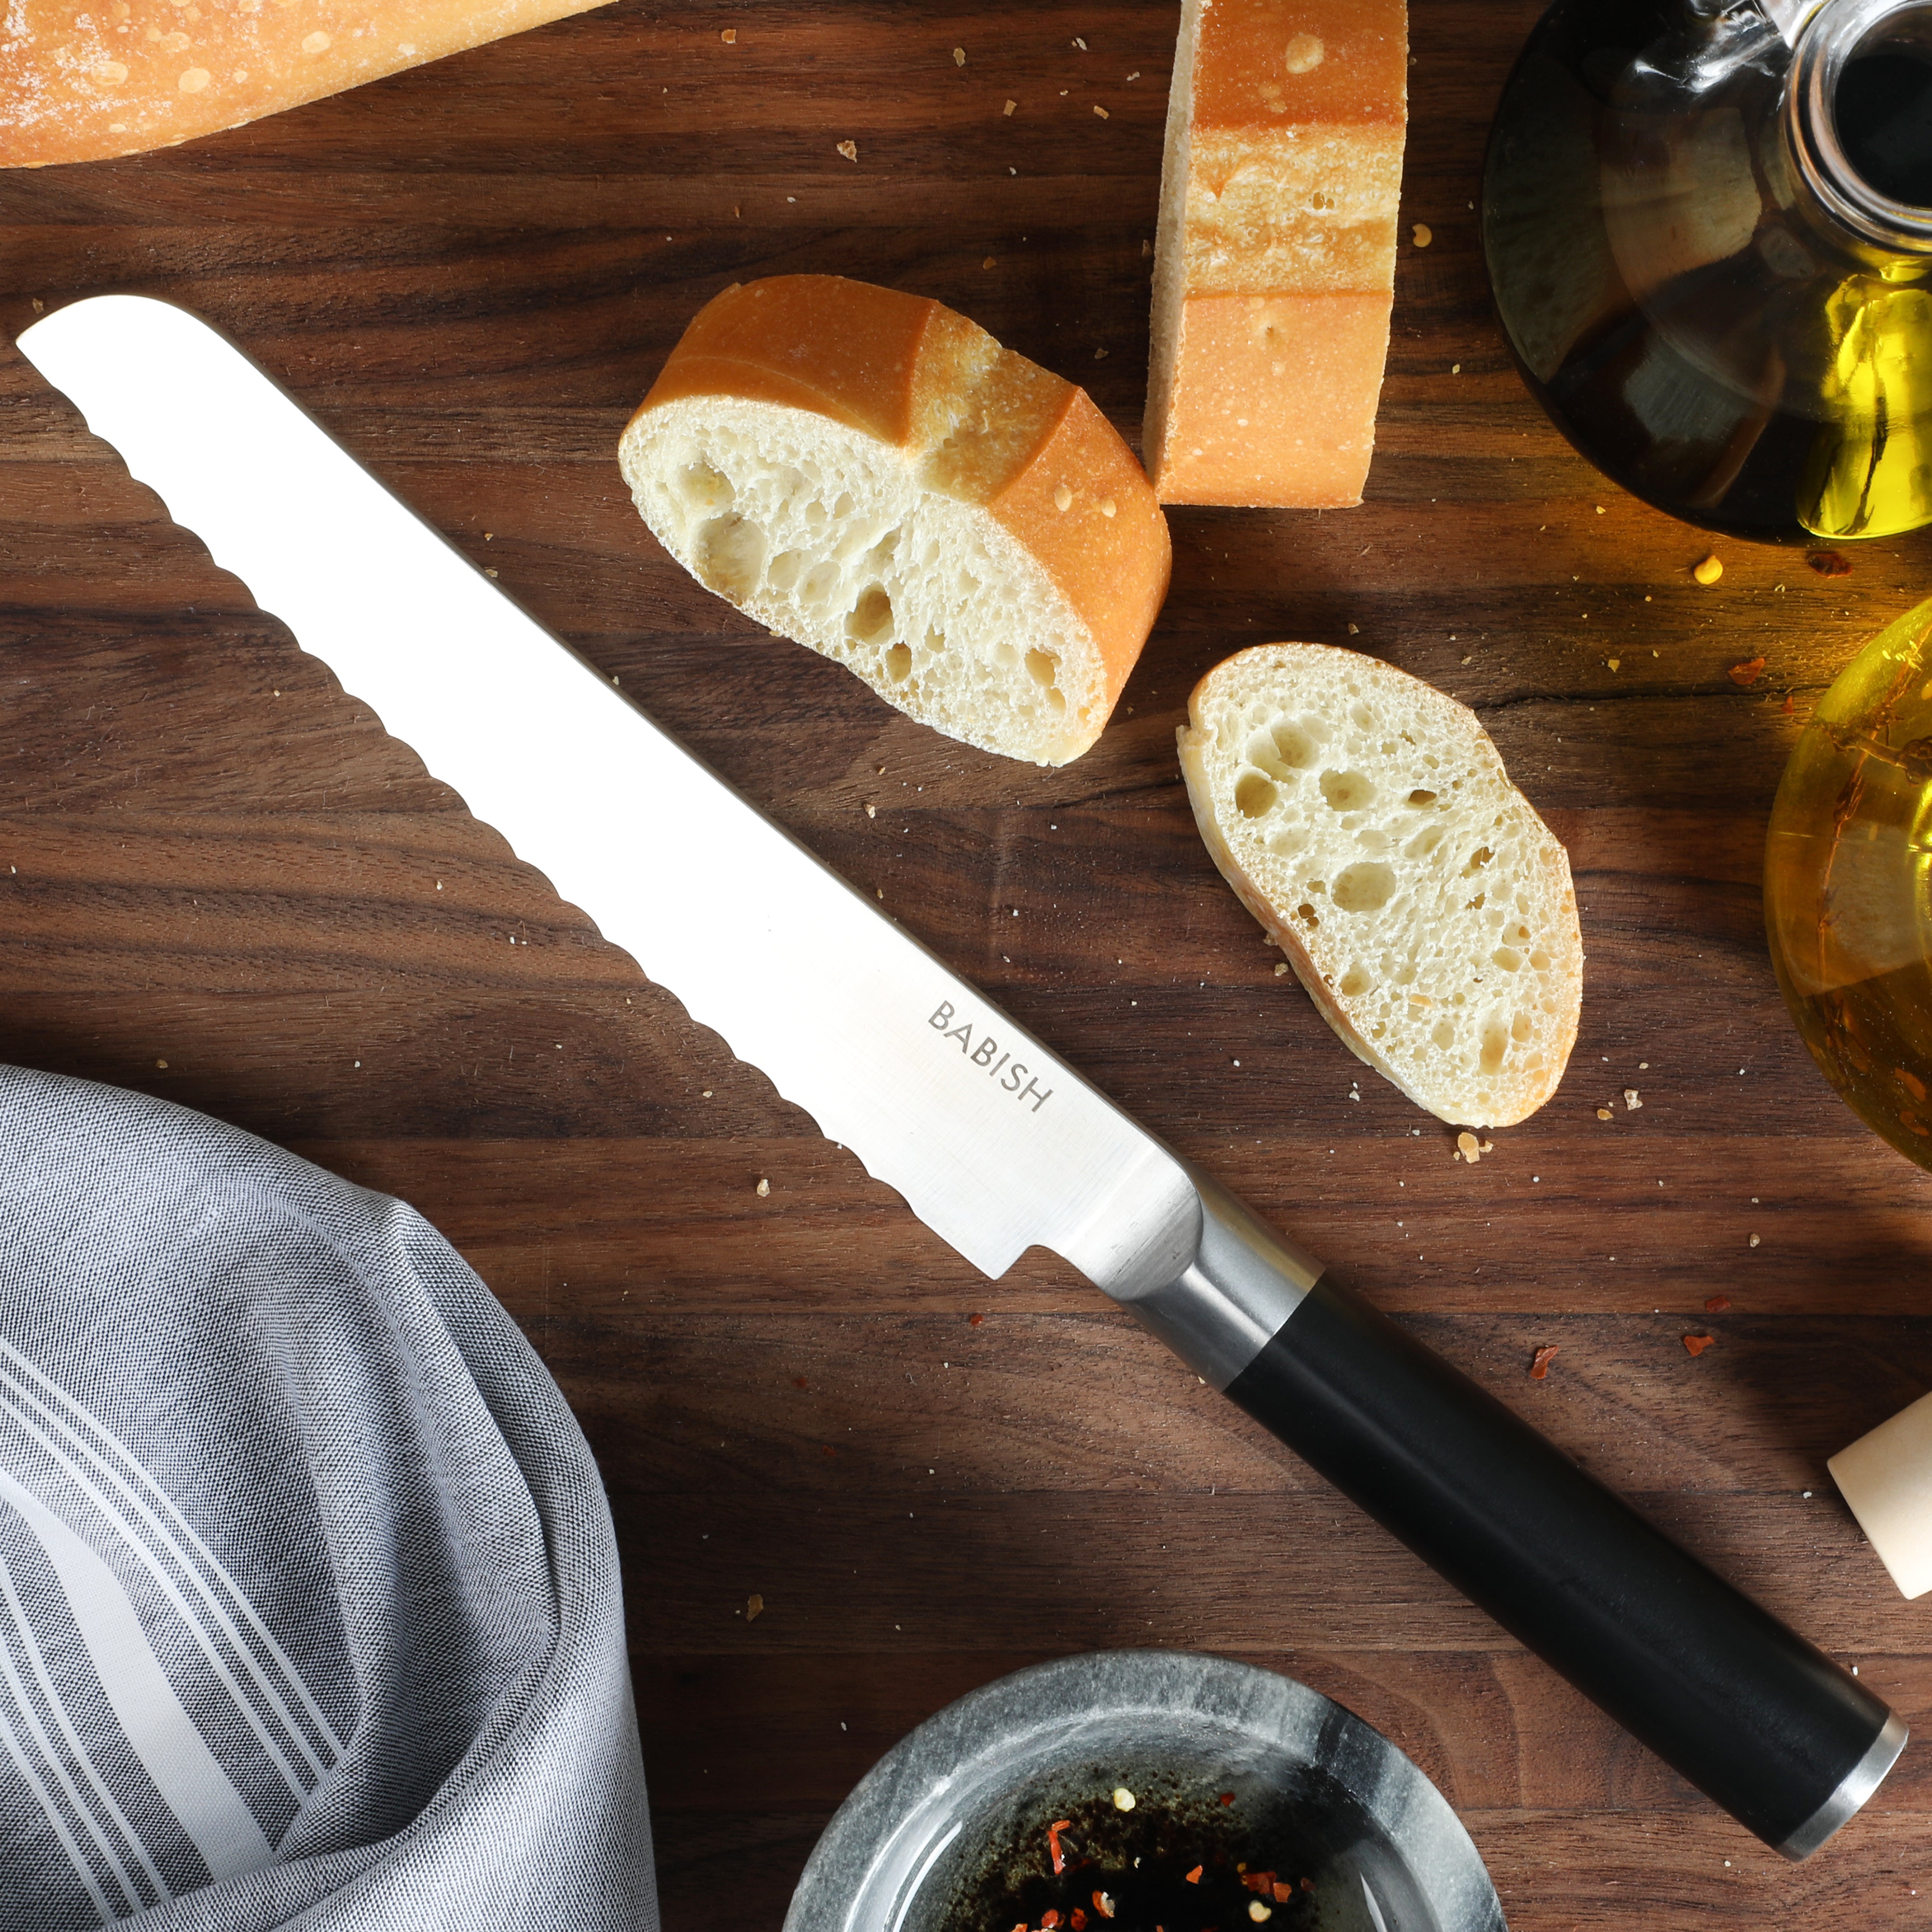 Babish 6.5 Stainless Steel Santoku Knife with ABS Handle Delivery -  DoorDash